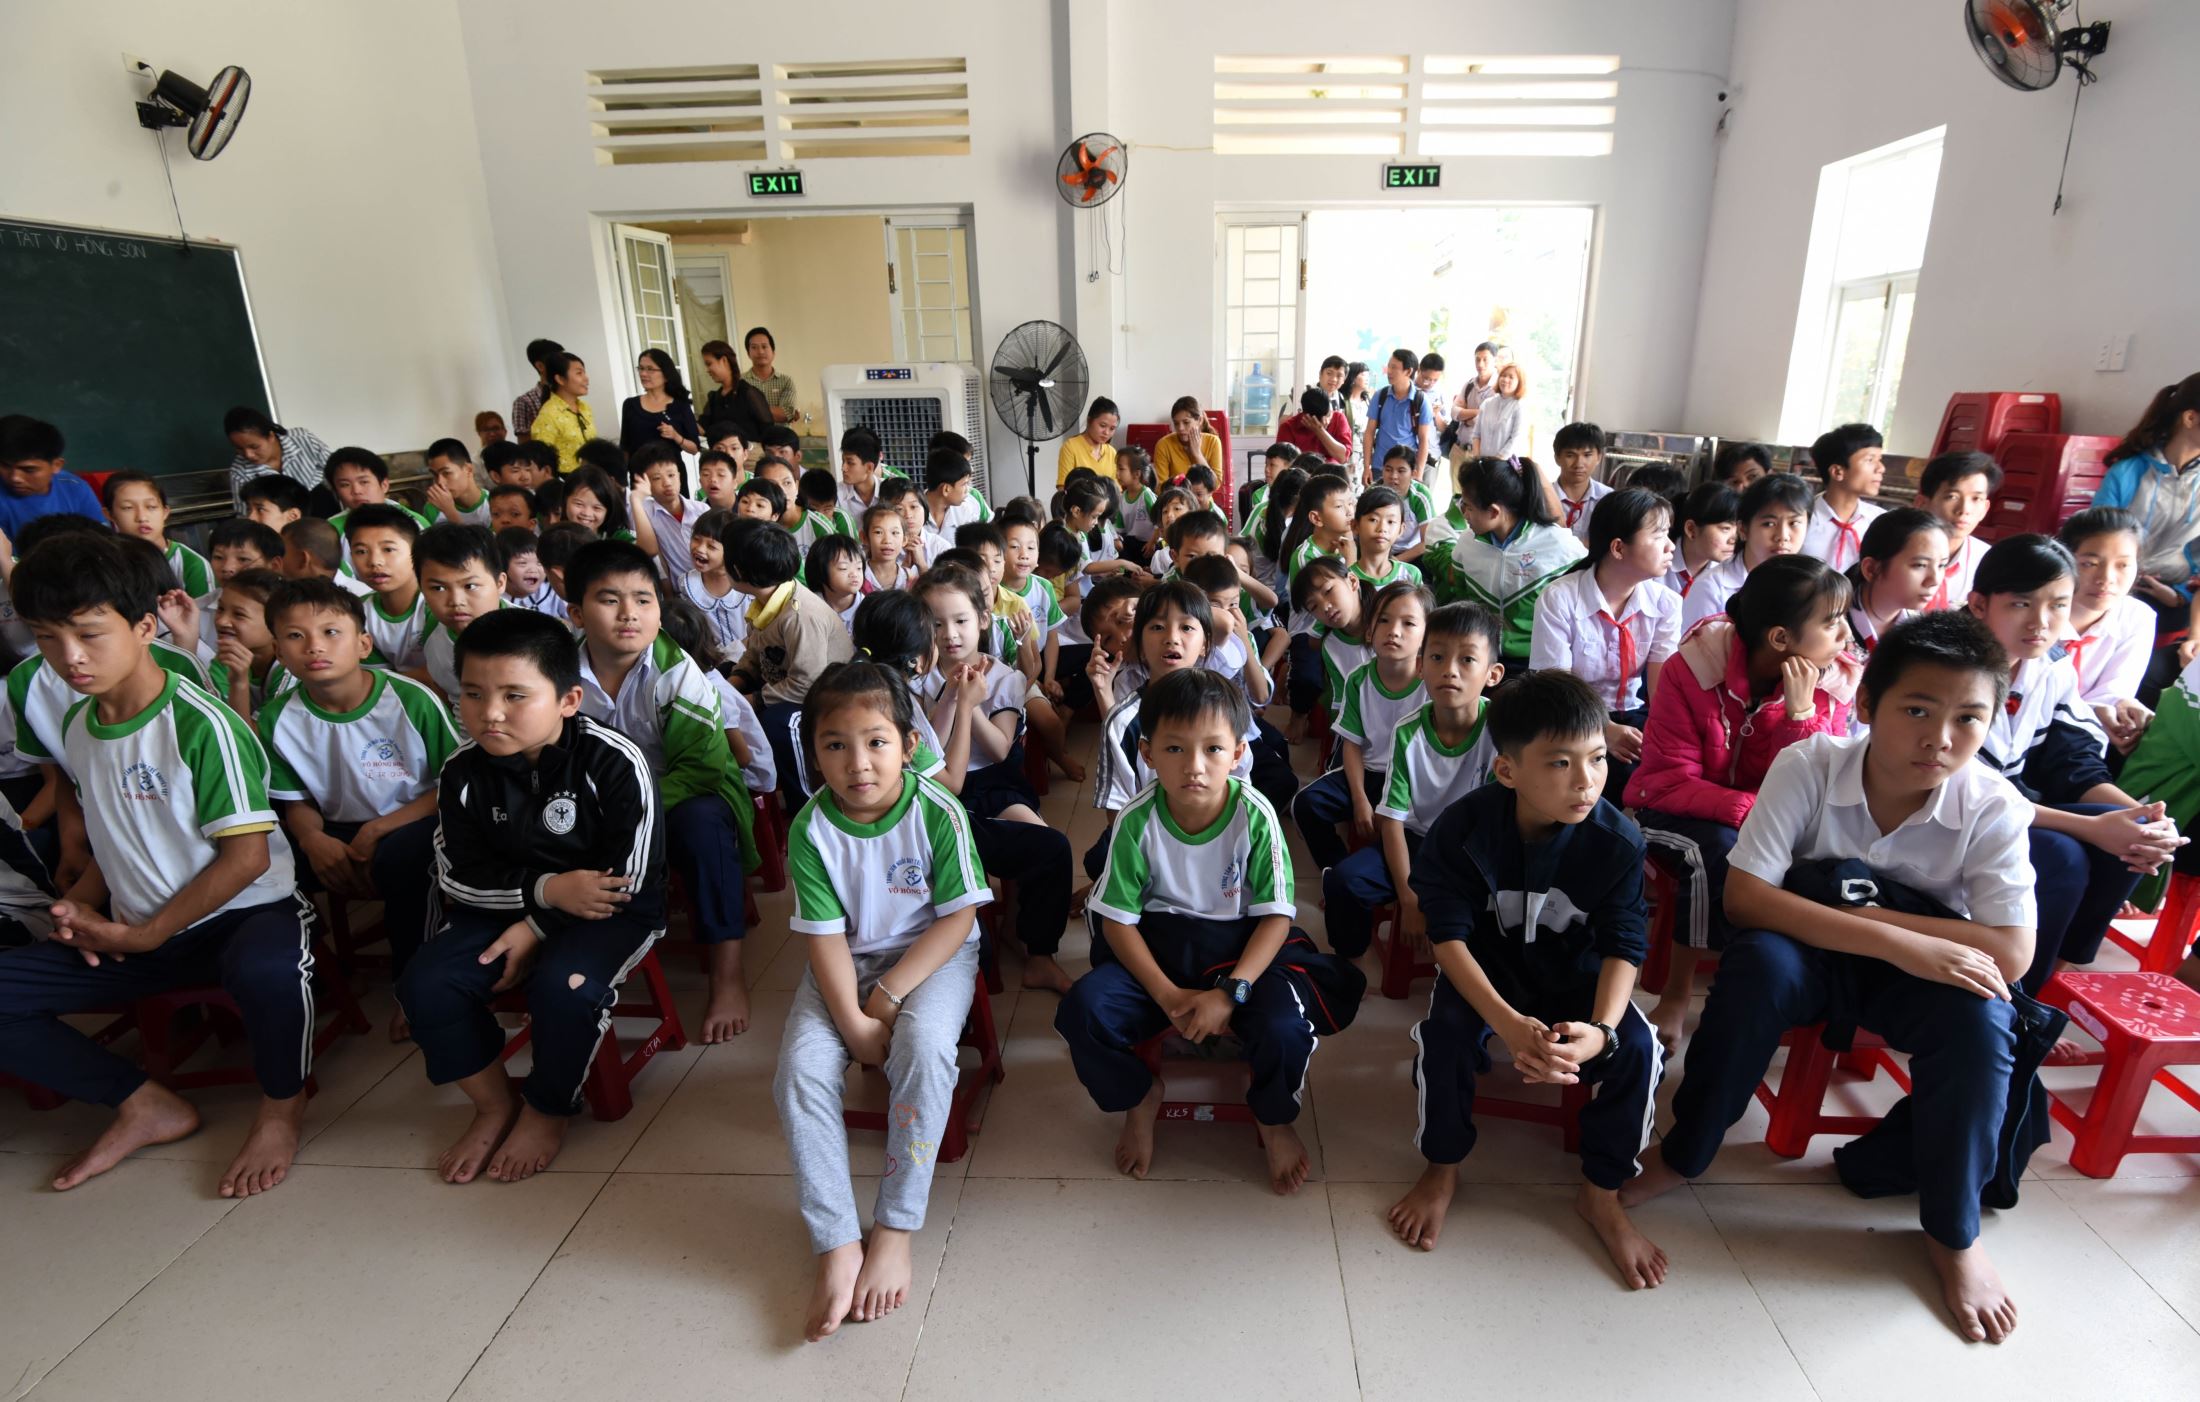 Vo Hong Son Center for Children with Special Needs is now bringing up 131 disabled children in difficult circumstances in Quang Ngai Province